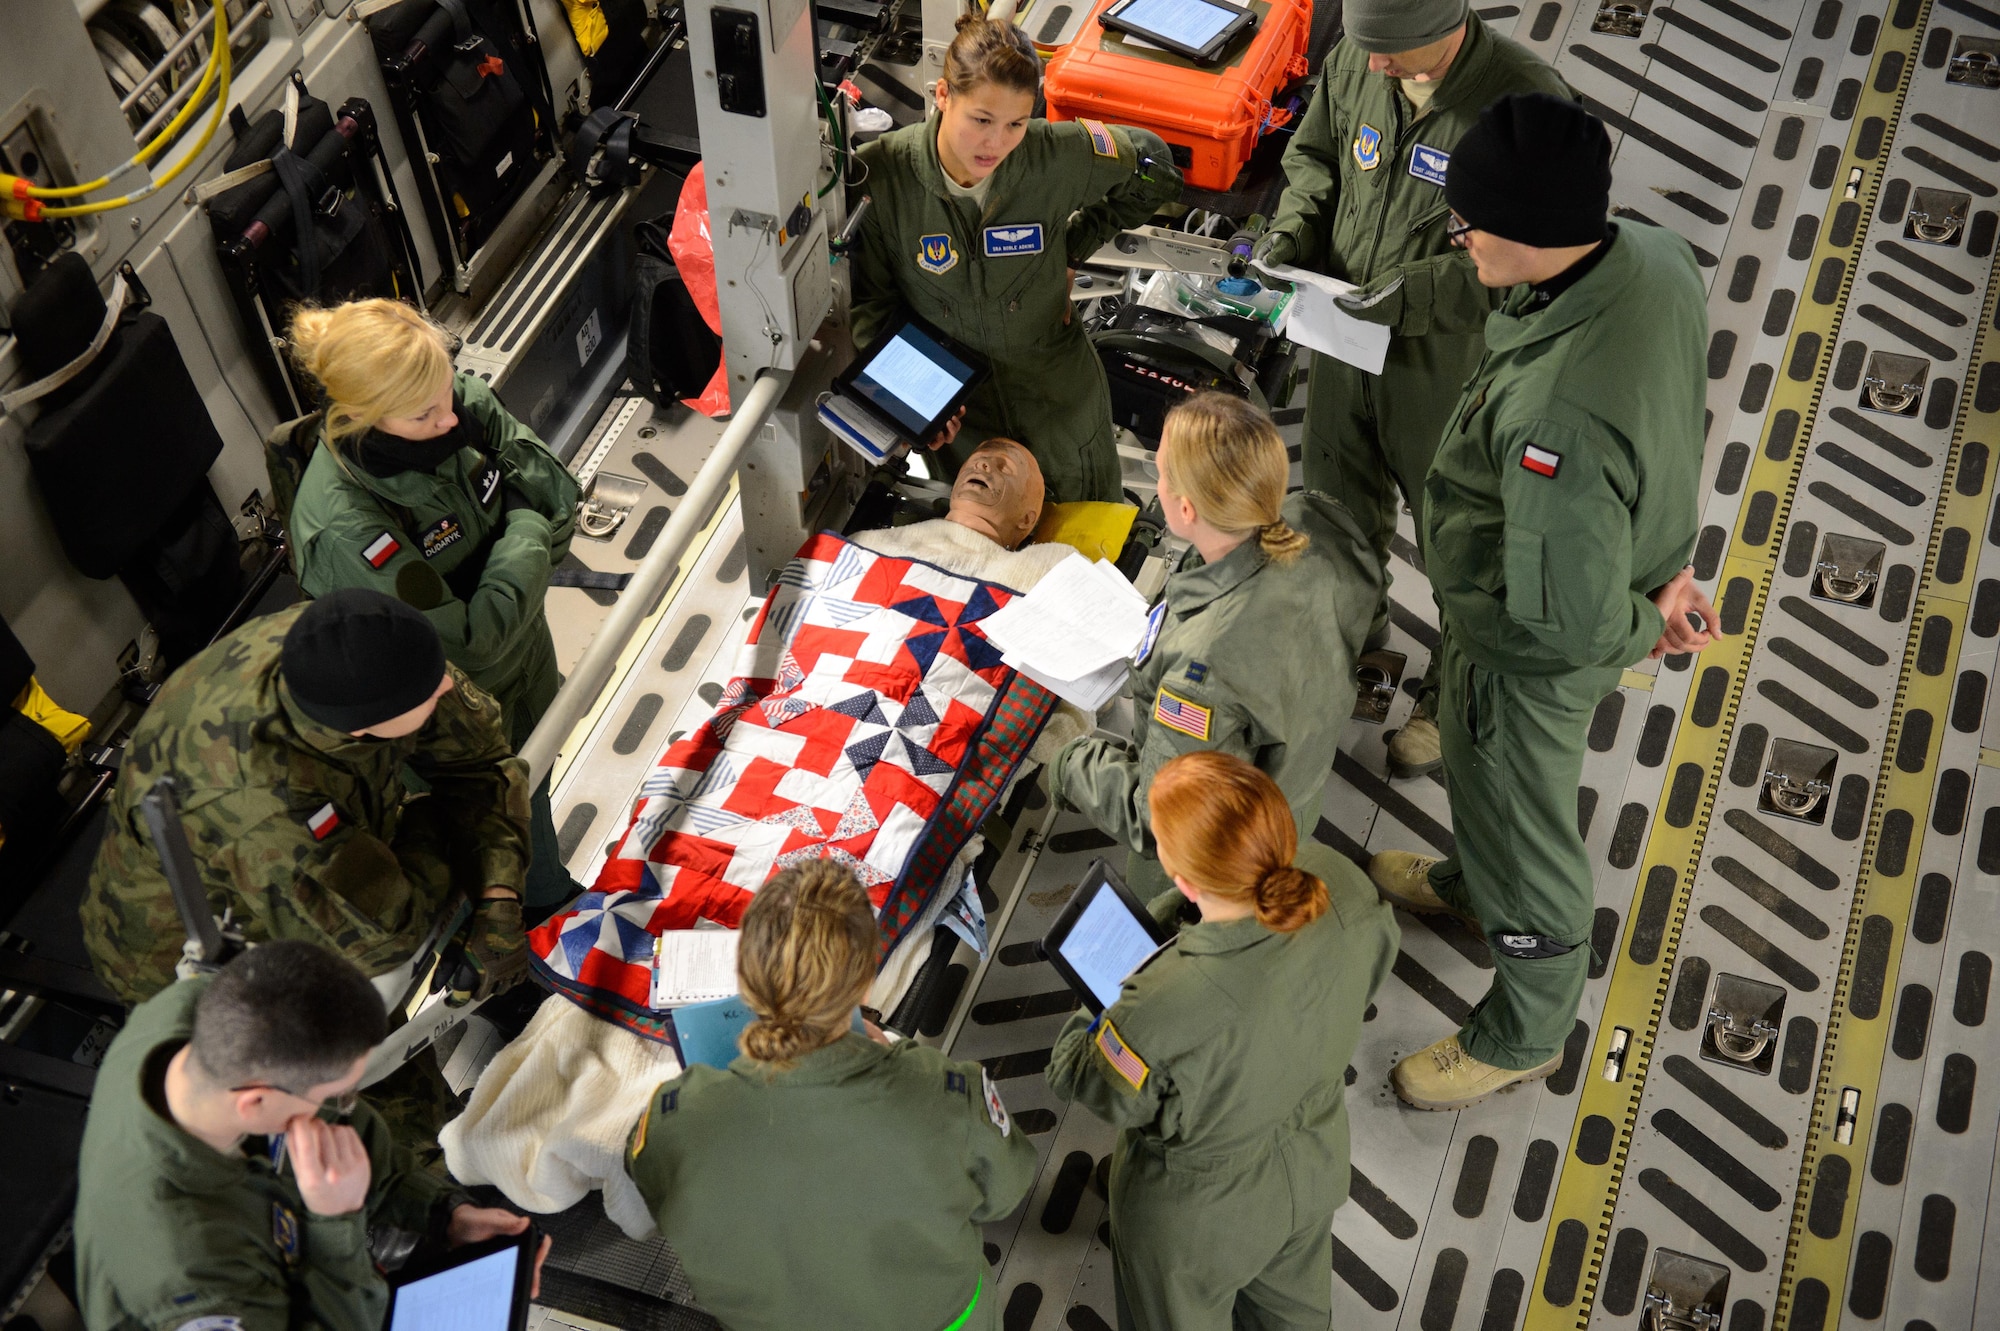 Members from the 86th Aeromedical Evacuation Squadron and Polish aeromedical evacuation specialists discuss the proper treatment of a mock patient Dec. 3, 2015, at Ramstein Air Base, Germany. Members of the 86th AES showcased their skills for the Polish medical officials in order for them to adapt desired skills. (U.S. Air Force photo/Staff Sgt. Armando A. Schwier-Morales)